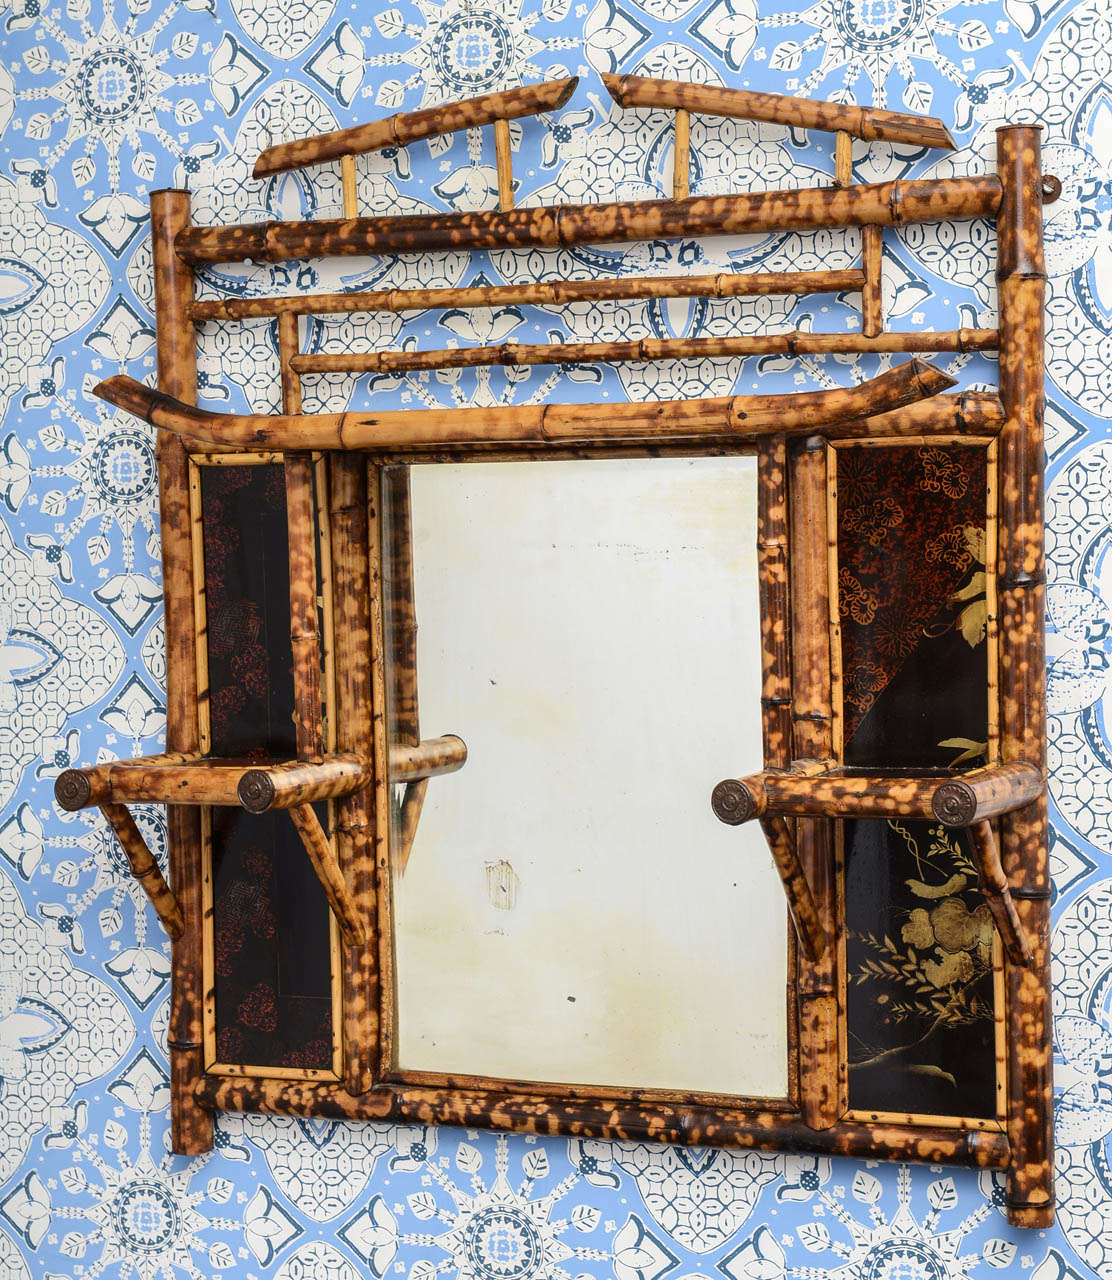 Own a piece of English and American history!  A beautiful 19th century English bamboo mirror from the private collection of Lilly Pulitzer's Palm Beach home.